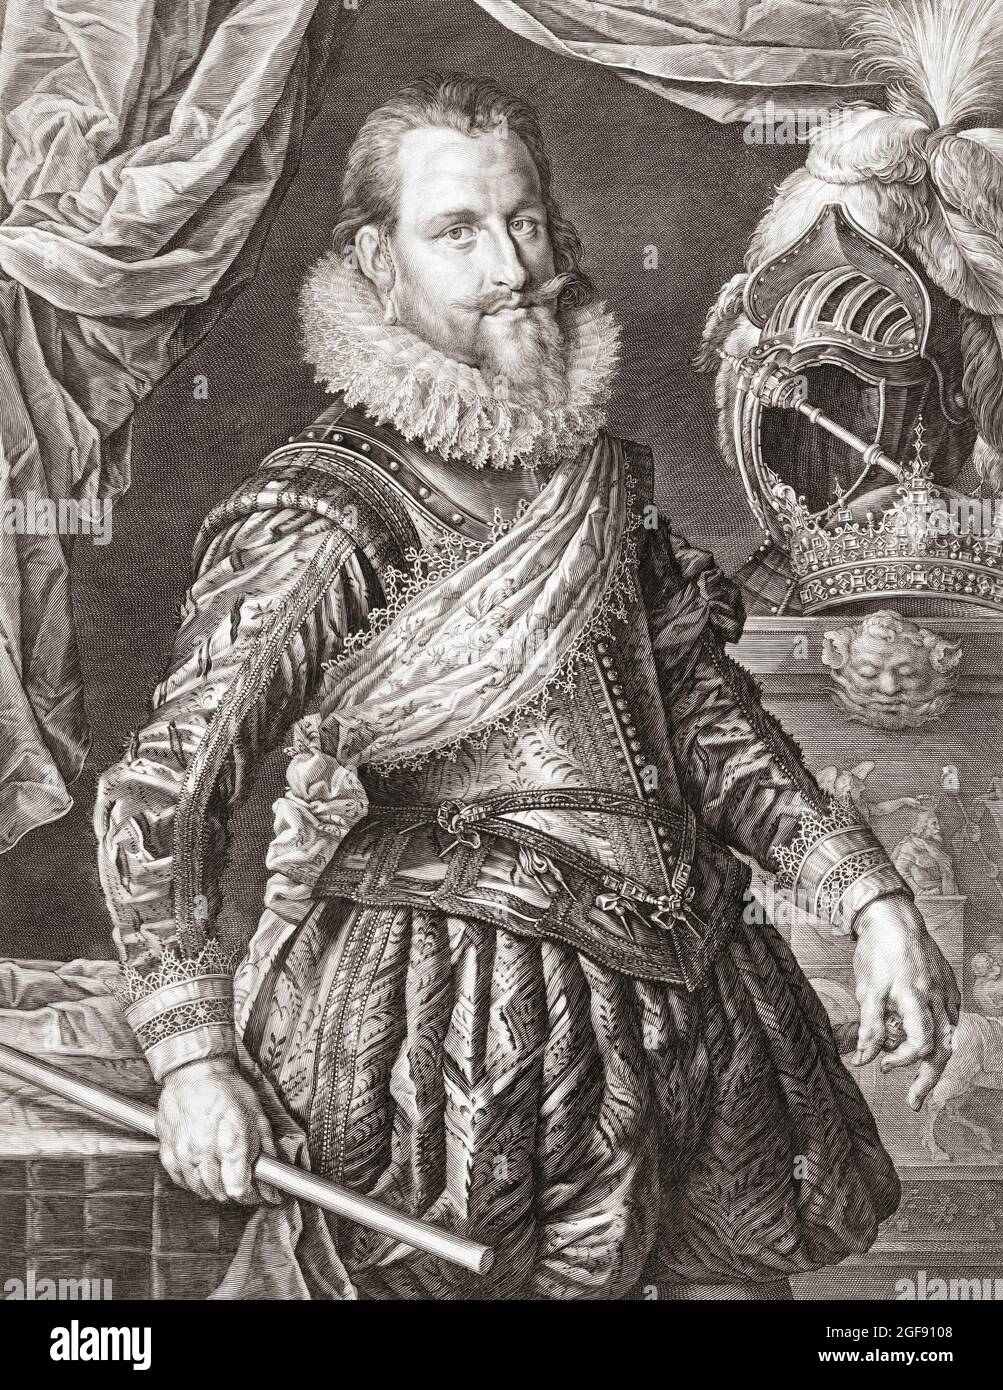 Christian IV, 1577 – 1648. King of Denmark and Norway and Duke of Holstein and Schleswig.  After an engraving by Jan Harmensz Muller from a painting by Pieter Isaacsz. Stock Photo